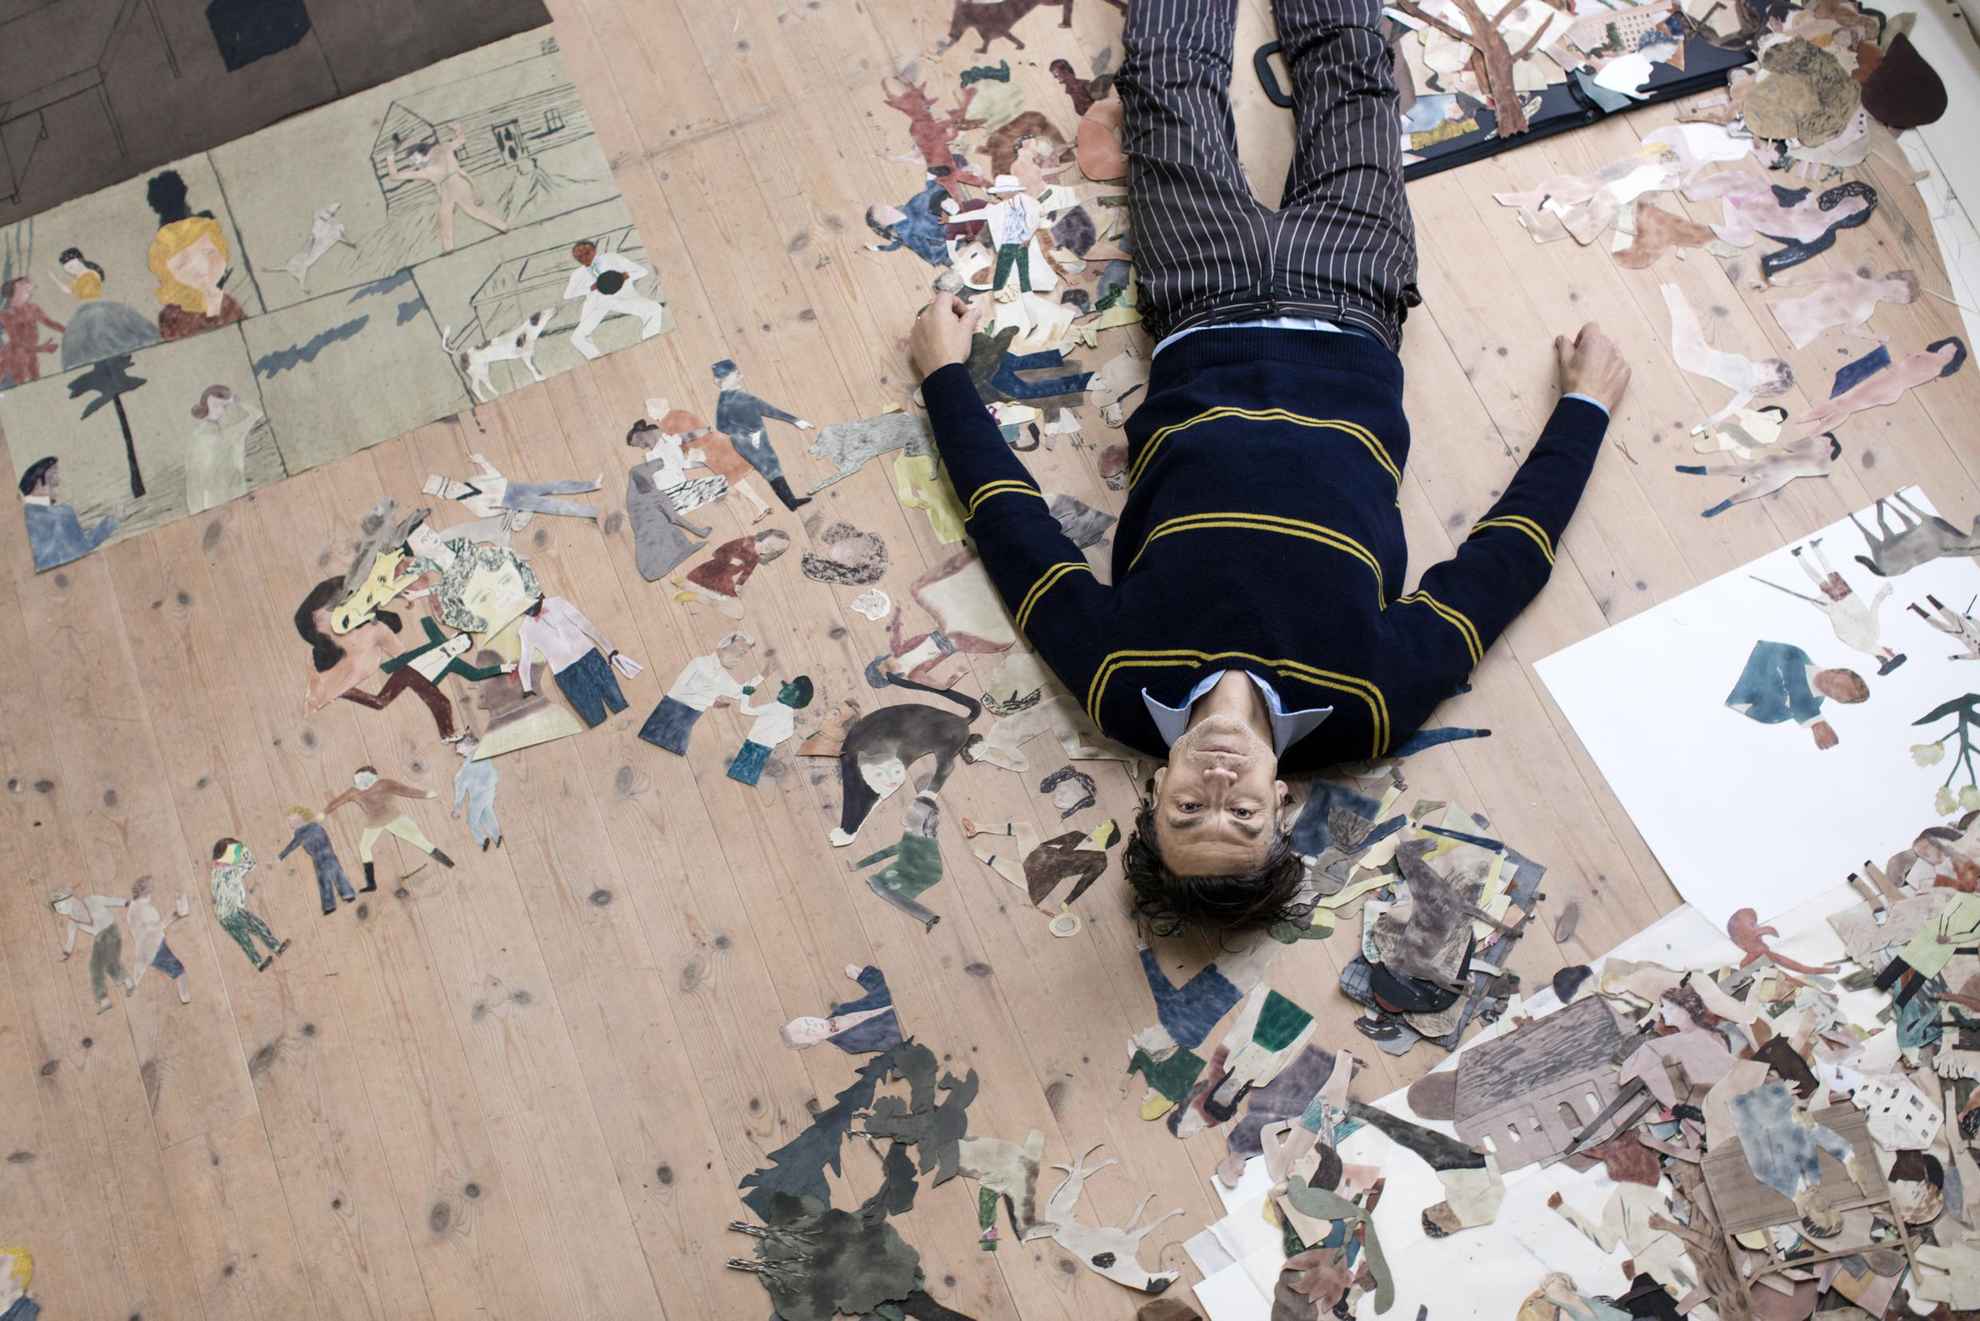 A image taken from above at the artist Jockum Nordström when he is lying on the floor together with his paintings and illustrations.